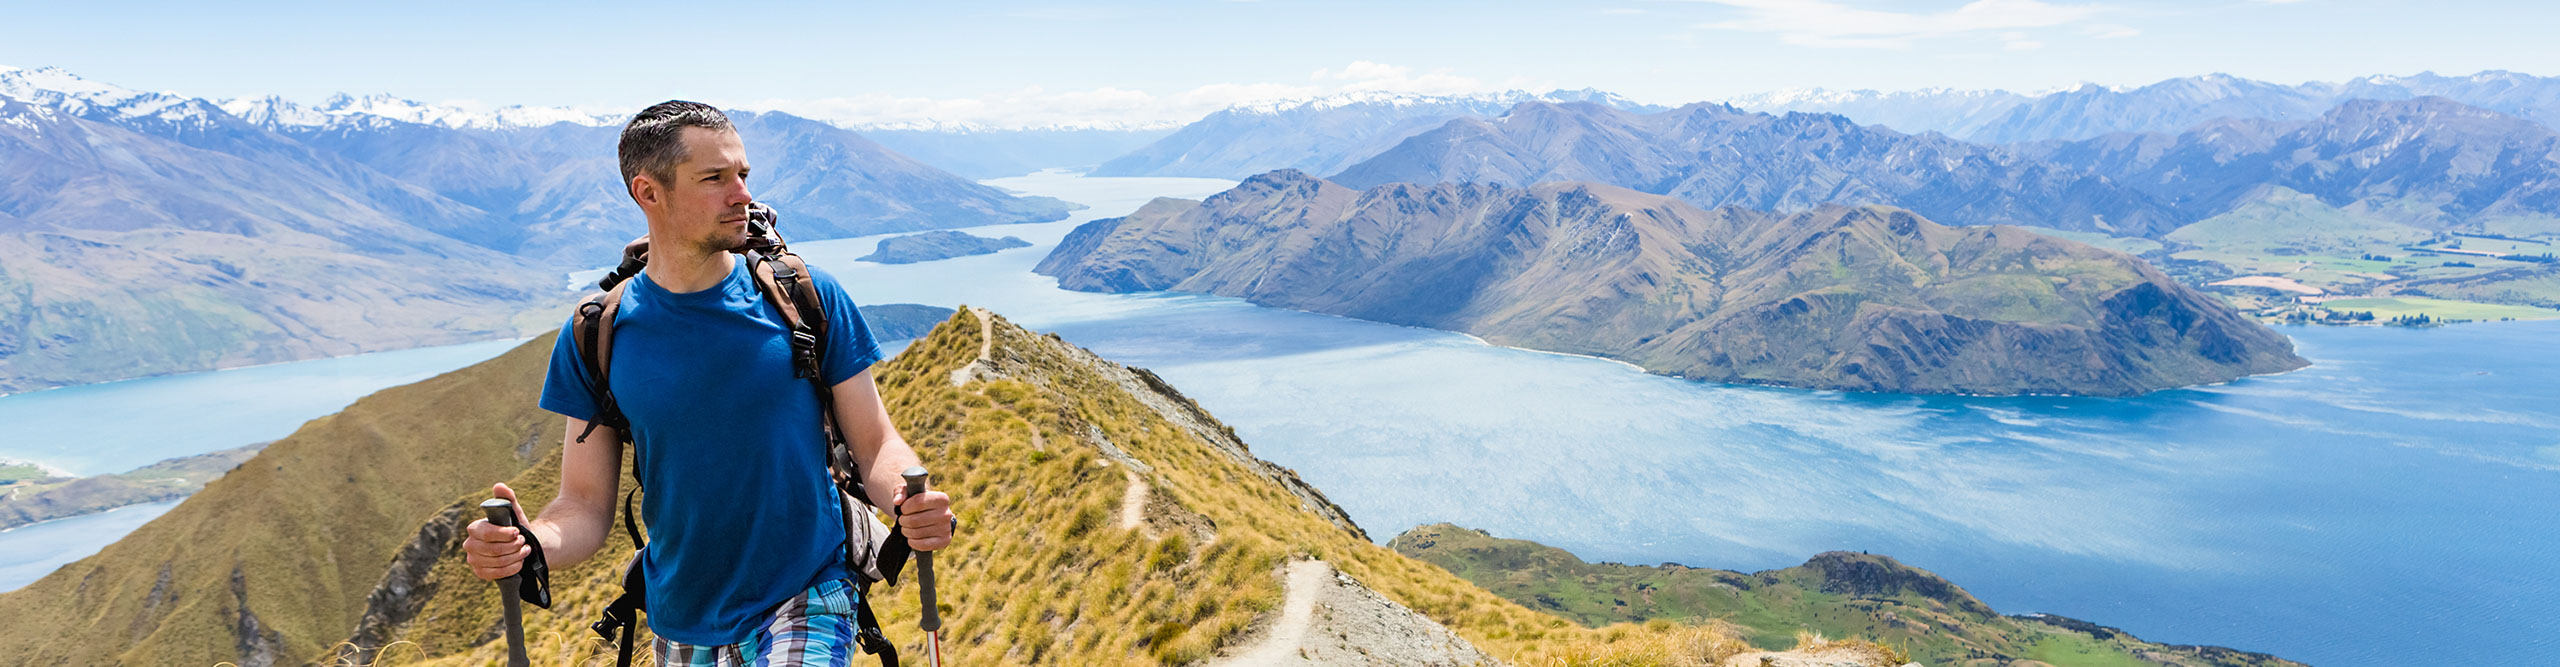 Hiker at top of the Remarkables, New Zealand, on a sunny day 